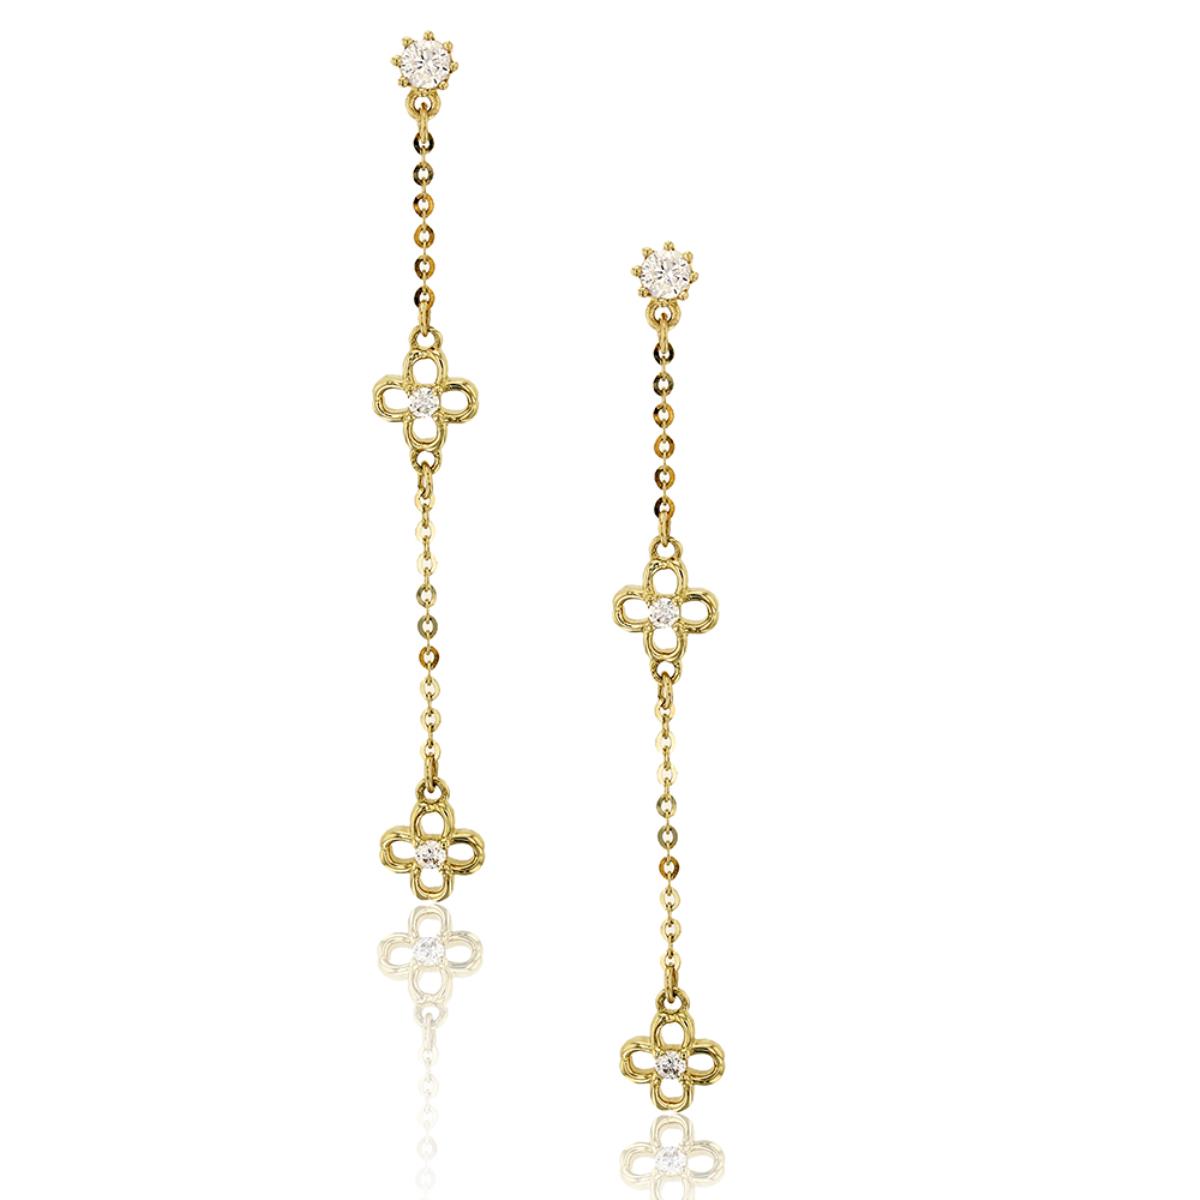 14K Yellow Gold Polished Micropave Open Flower Dangling Stud Earring